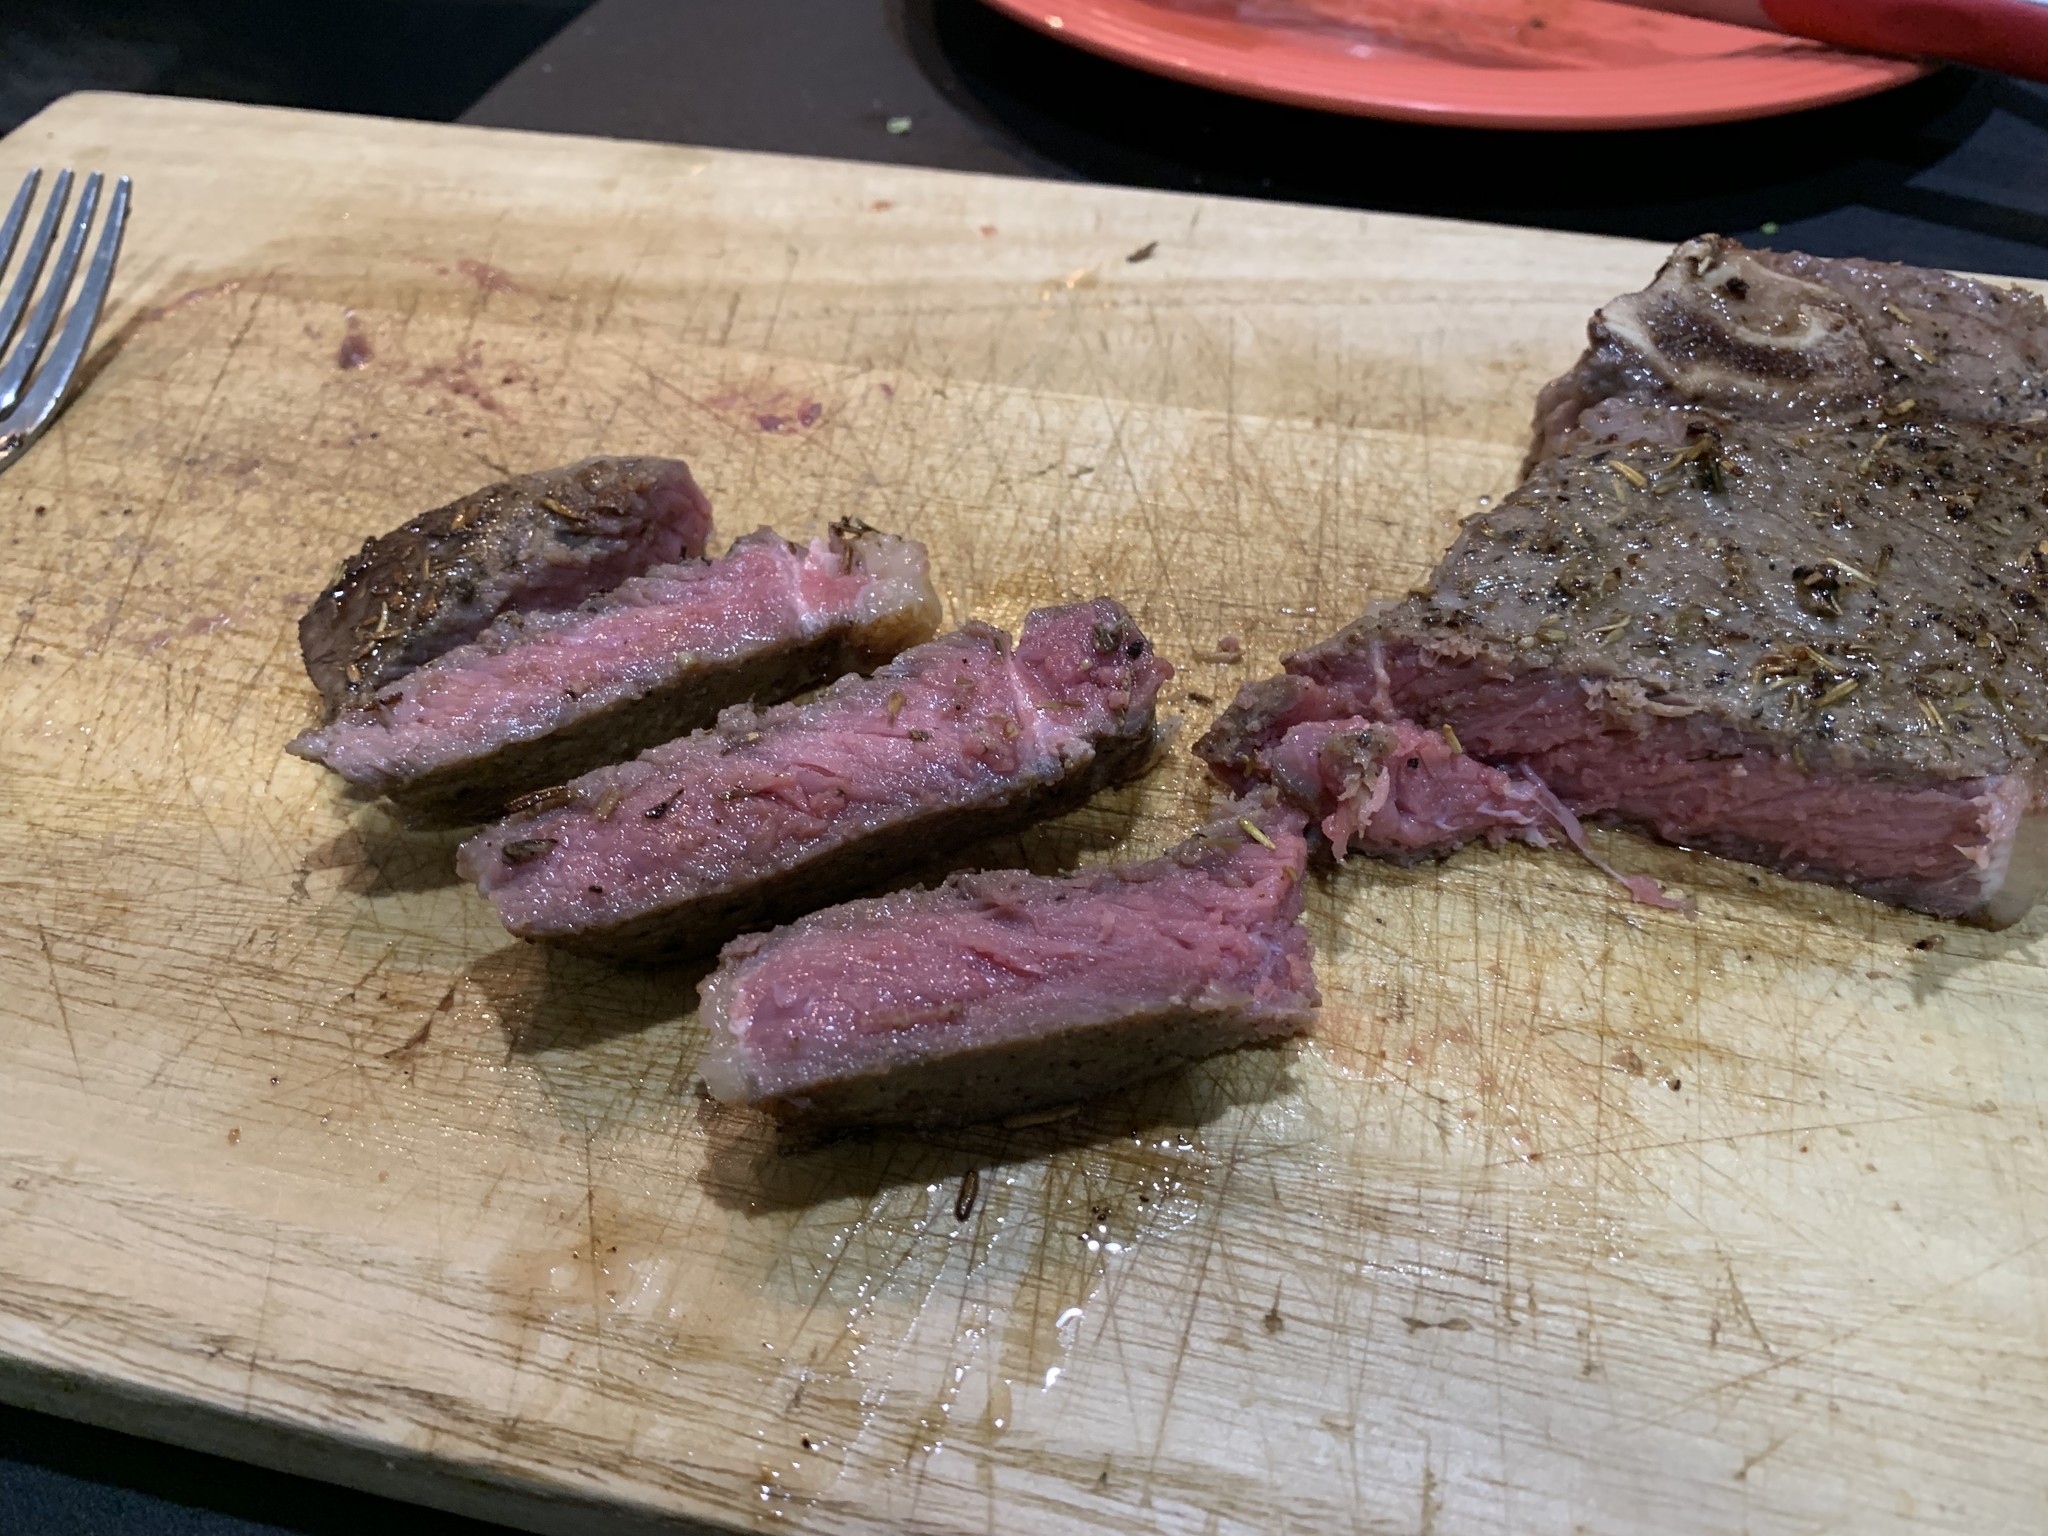 A rare steak cooked by sous vide and then seared in a cast iron skillet